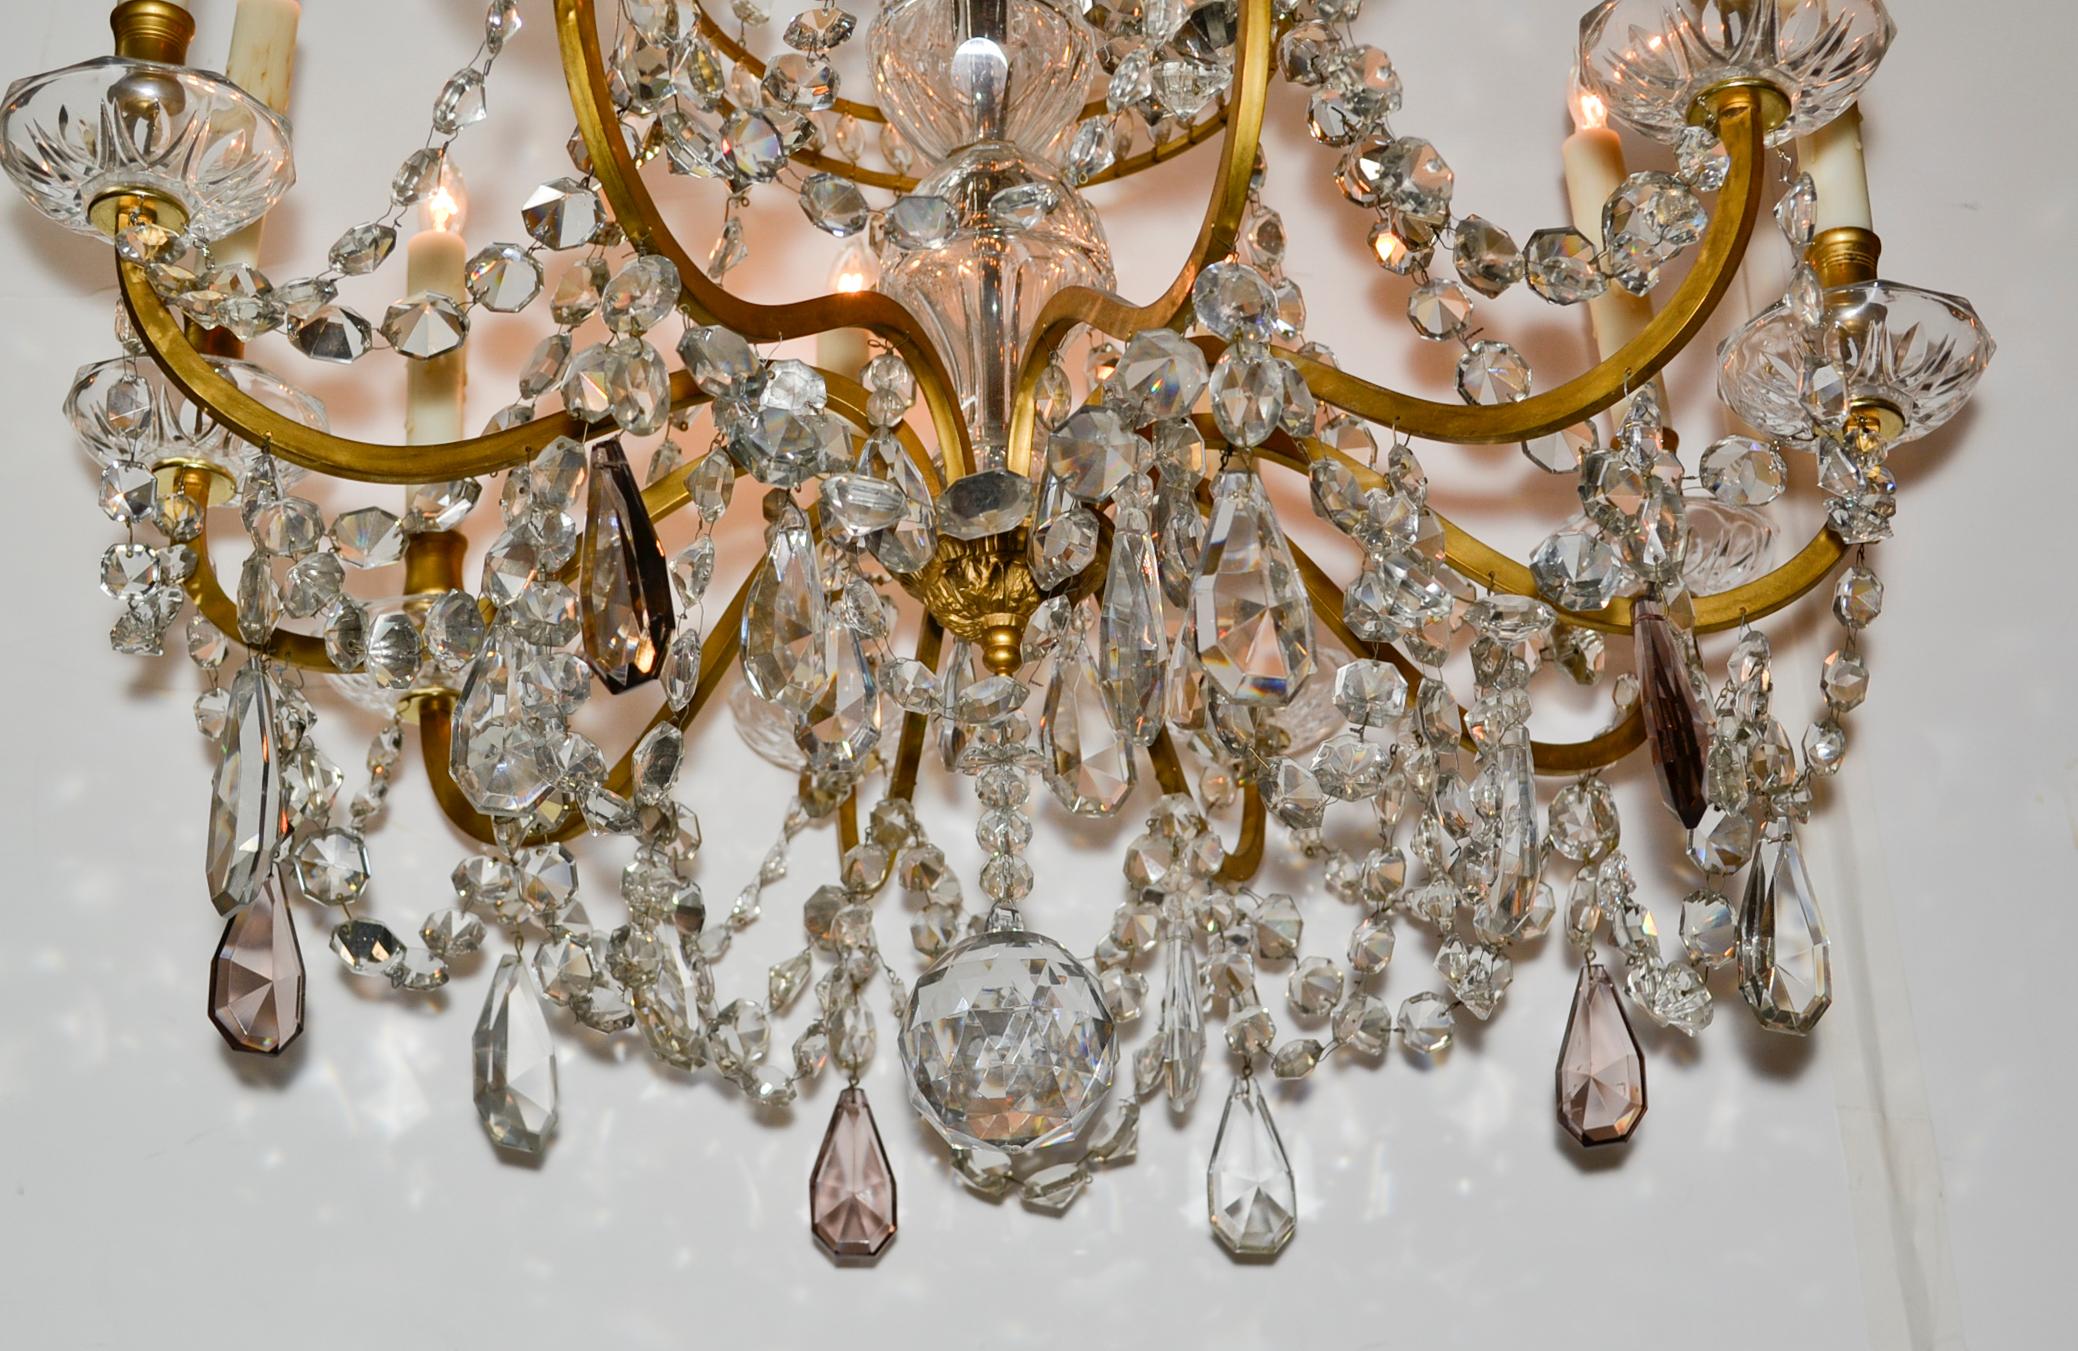 Exquisite 19th century French gilt bronze and crystal 10-light chandelier.